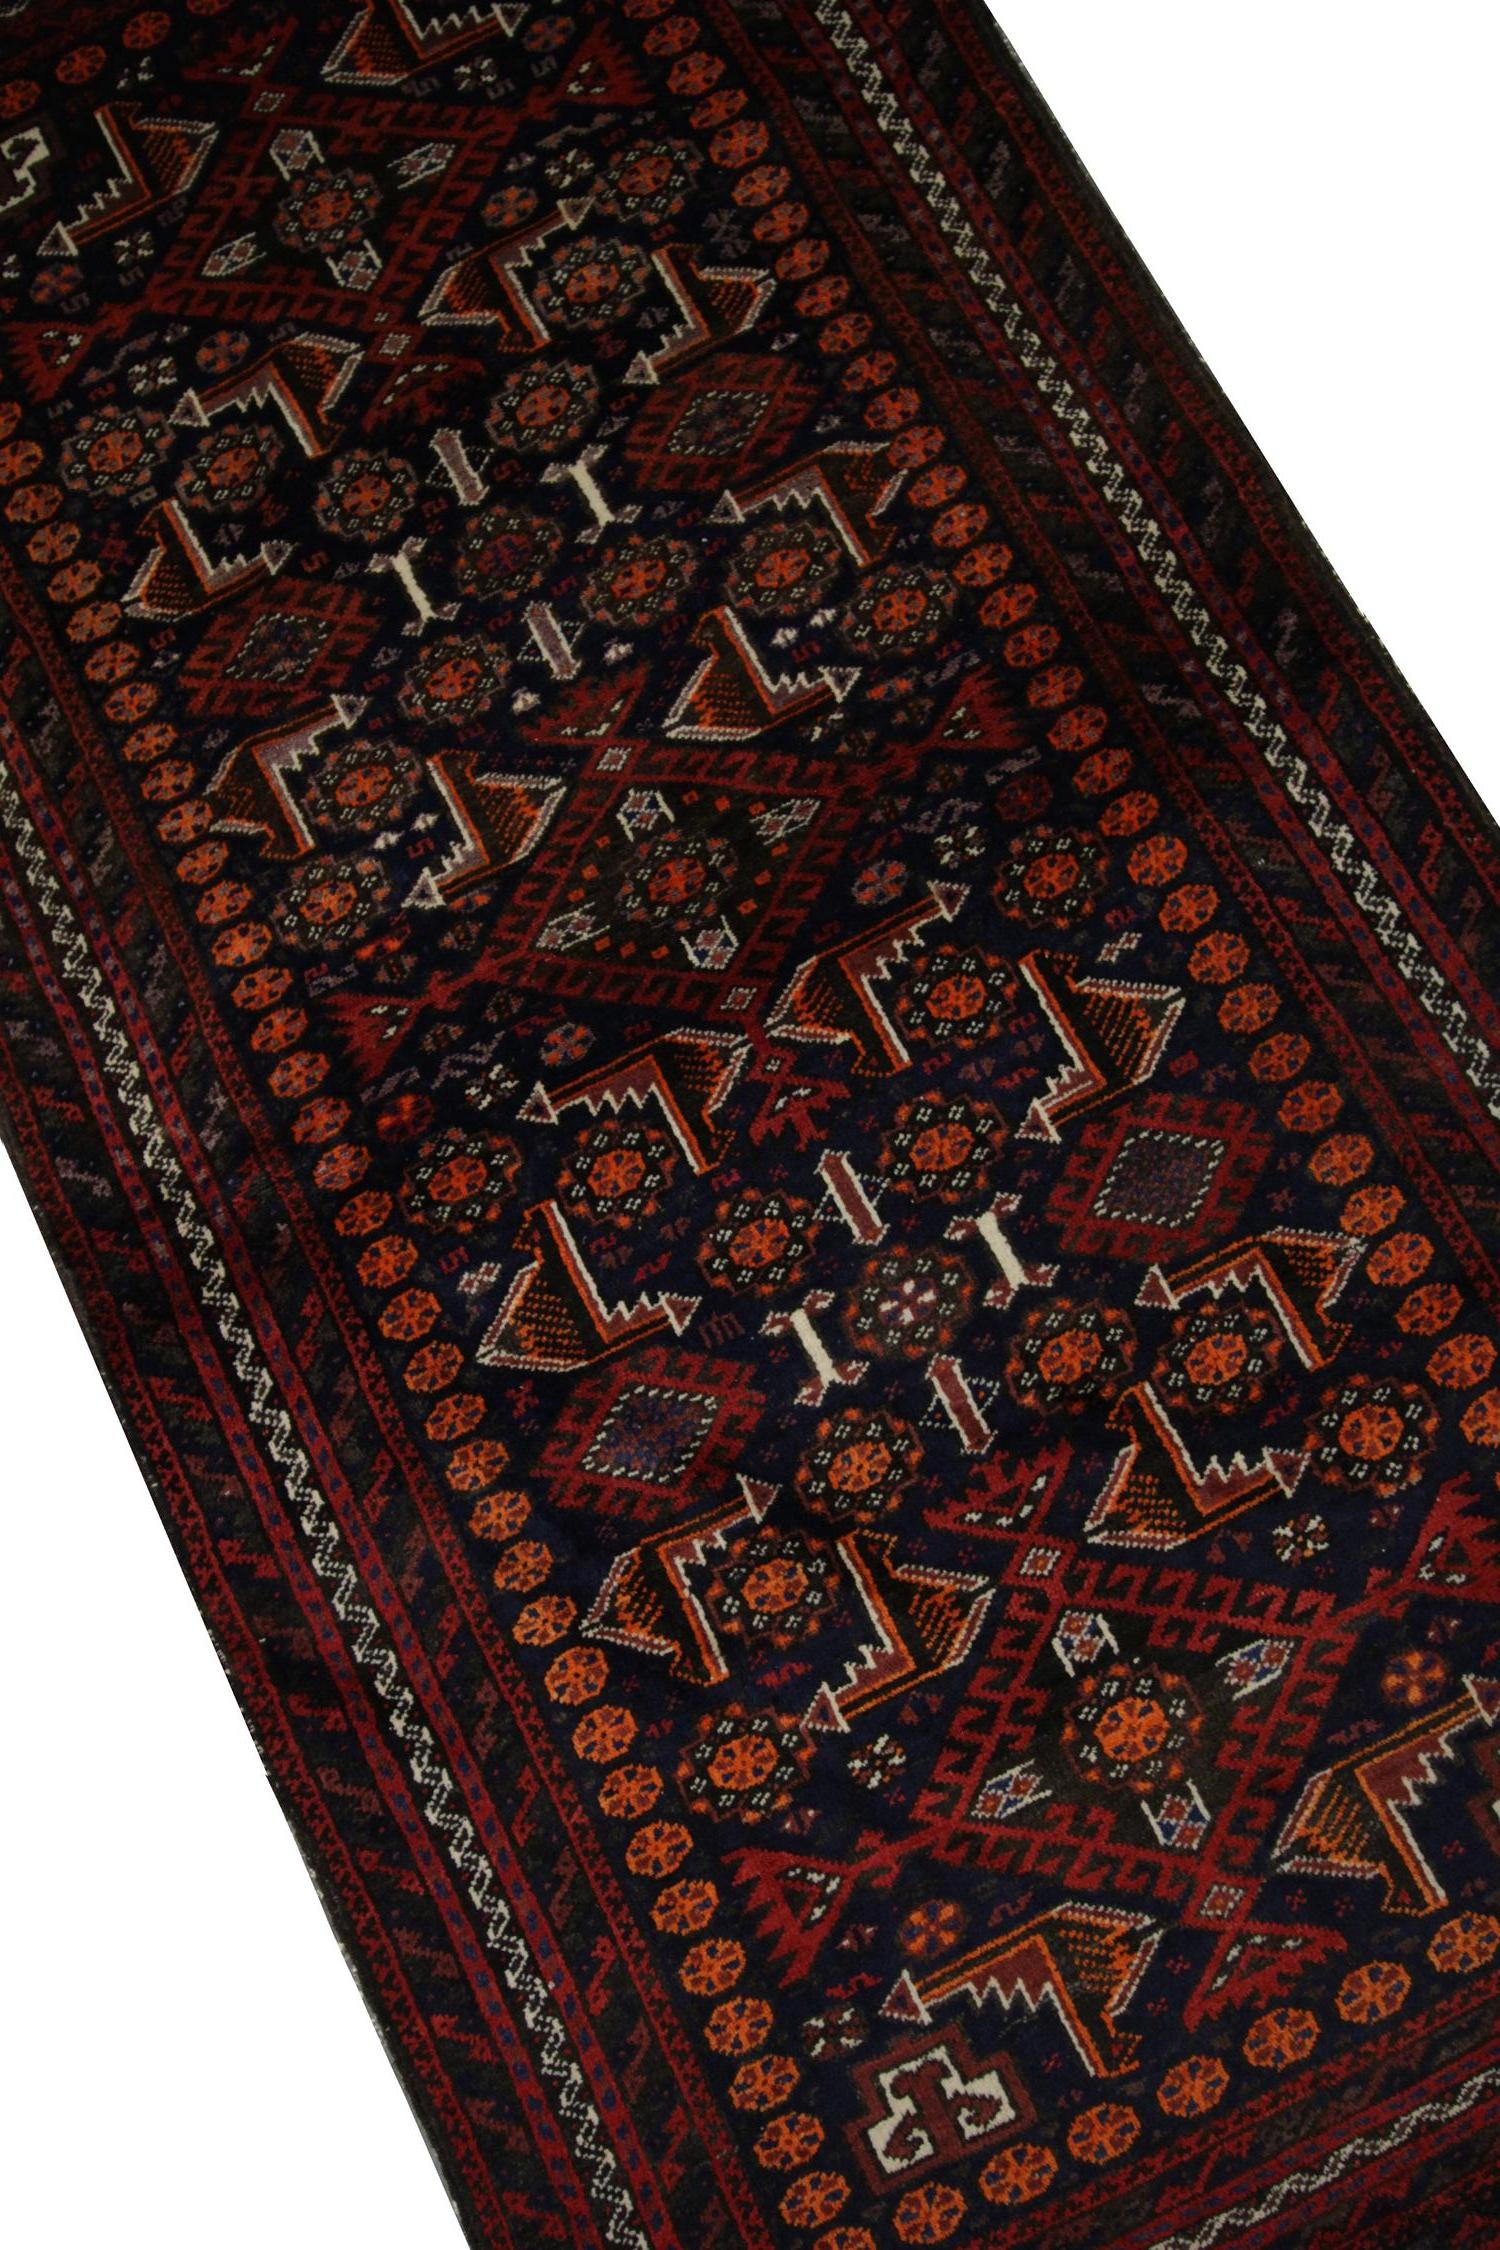 Hand-Knotted Vintage Tribal Area Rug, Handwoven Afghanistan Red Wool Carpet